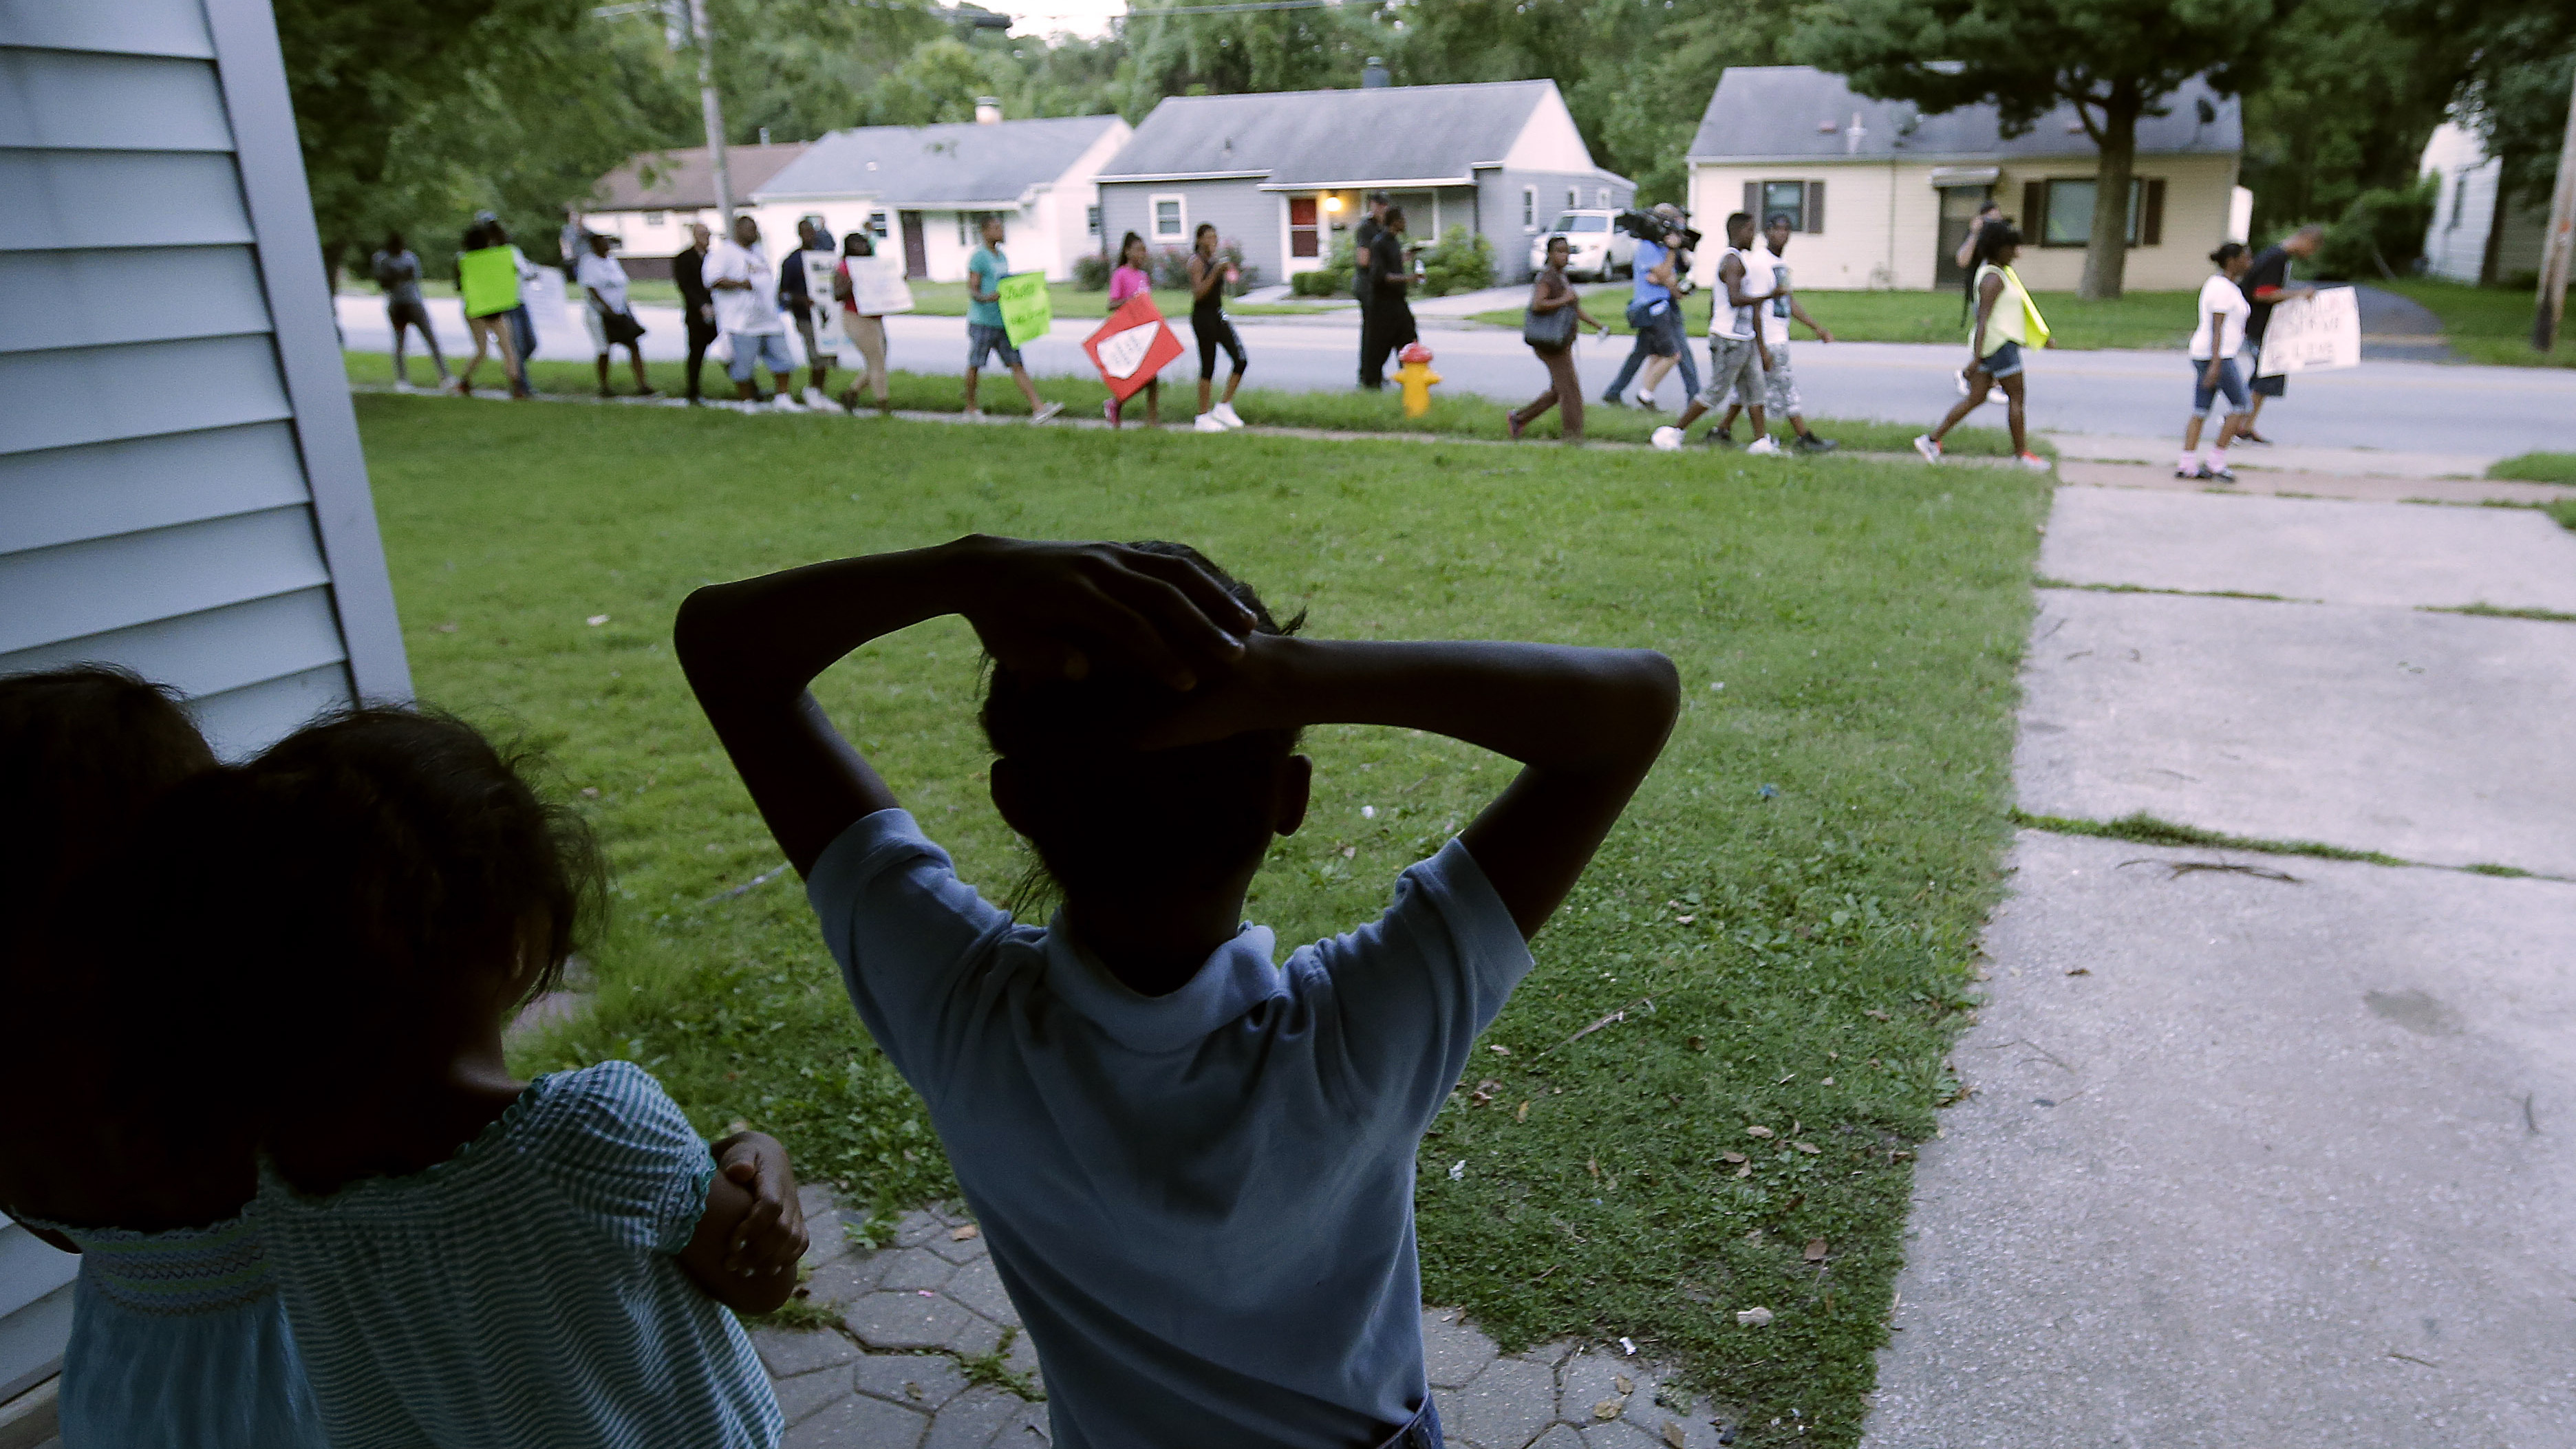 Unrest In Ferguson May Speed Up Decline Of Real Estate